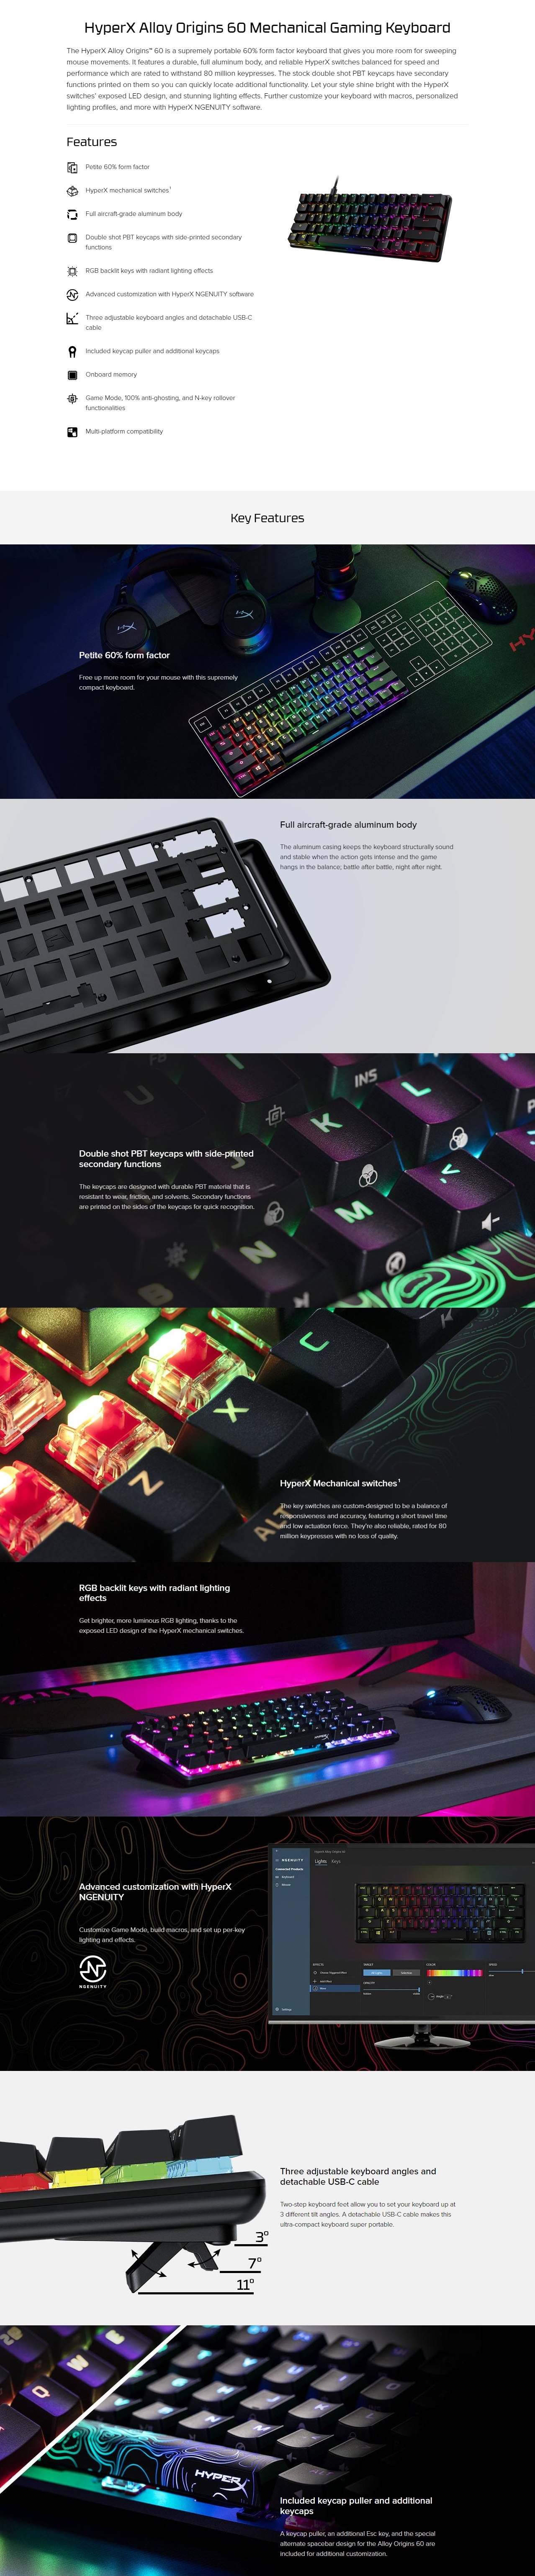 A large marketing image providing additional information about the product HyperX Alloy Origins 60 - Compact Mechanical Keyboard (HyperX Red Switch) - Additional alt info not provided